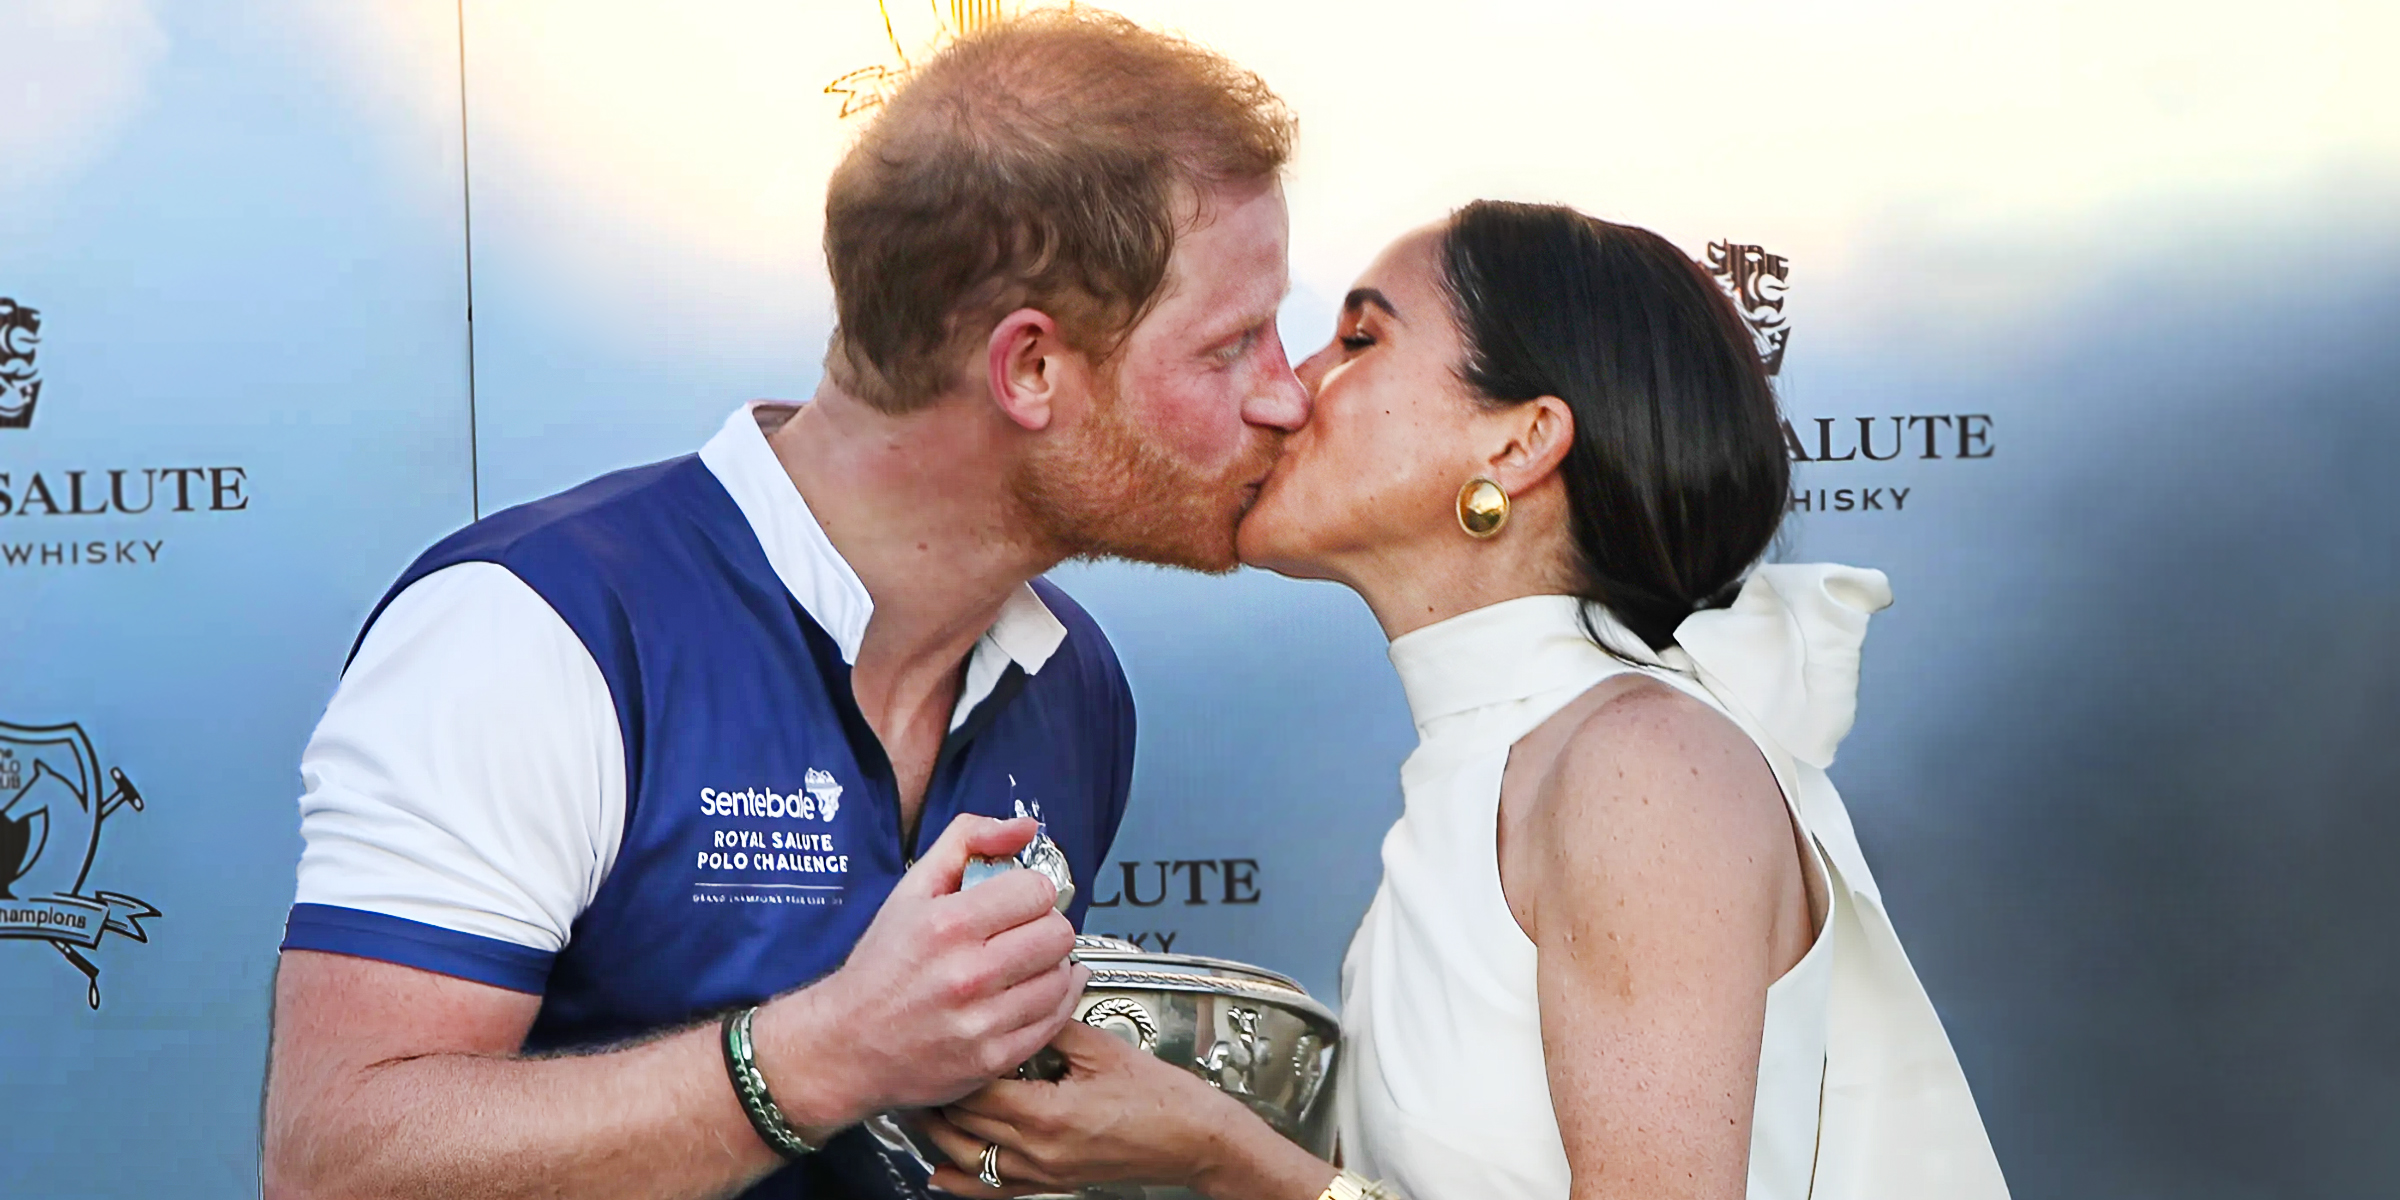 Prince Harry and Meghan Markle | Source: Getty Images